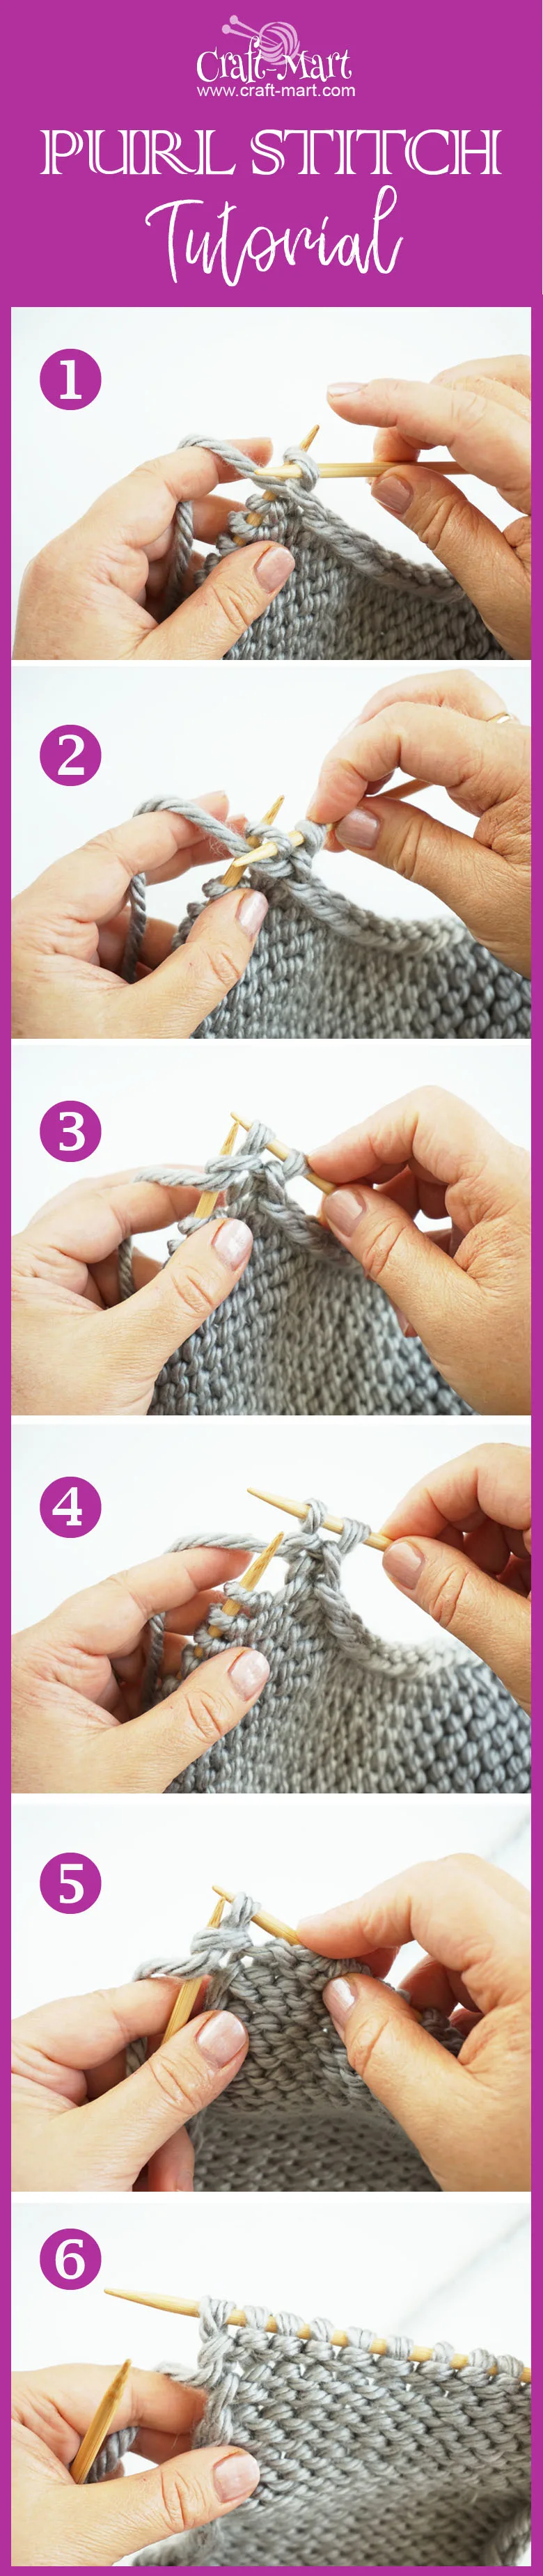  how to knit purl stitch for beginners by craft-mart.com